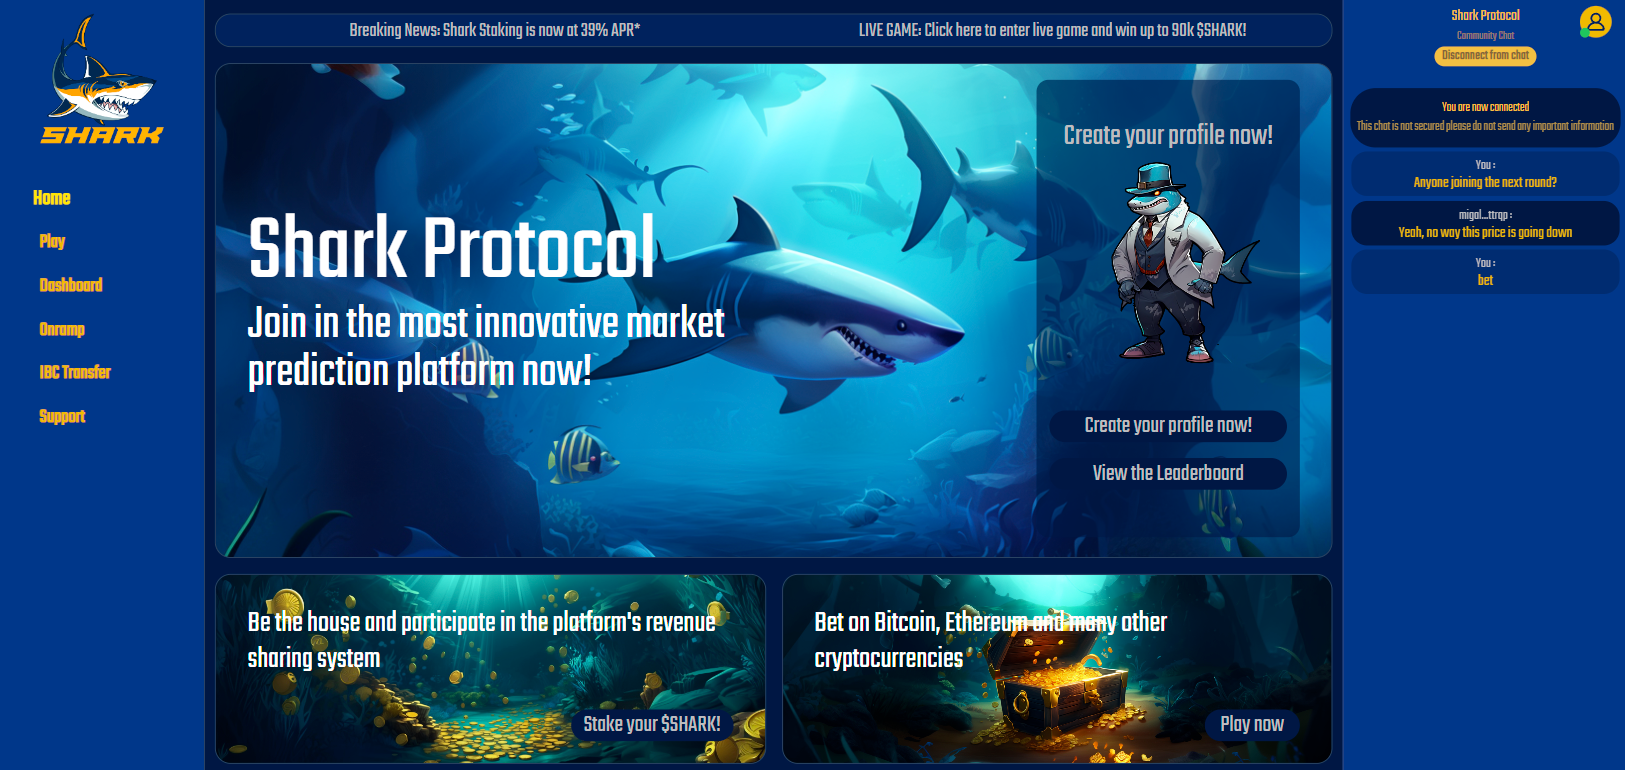 SHARK: Tokenomics, Airdrop, Staking & Visuals, by Racoon